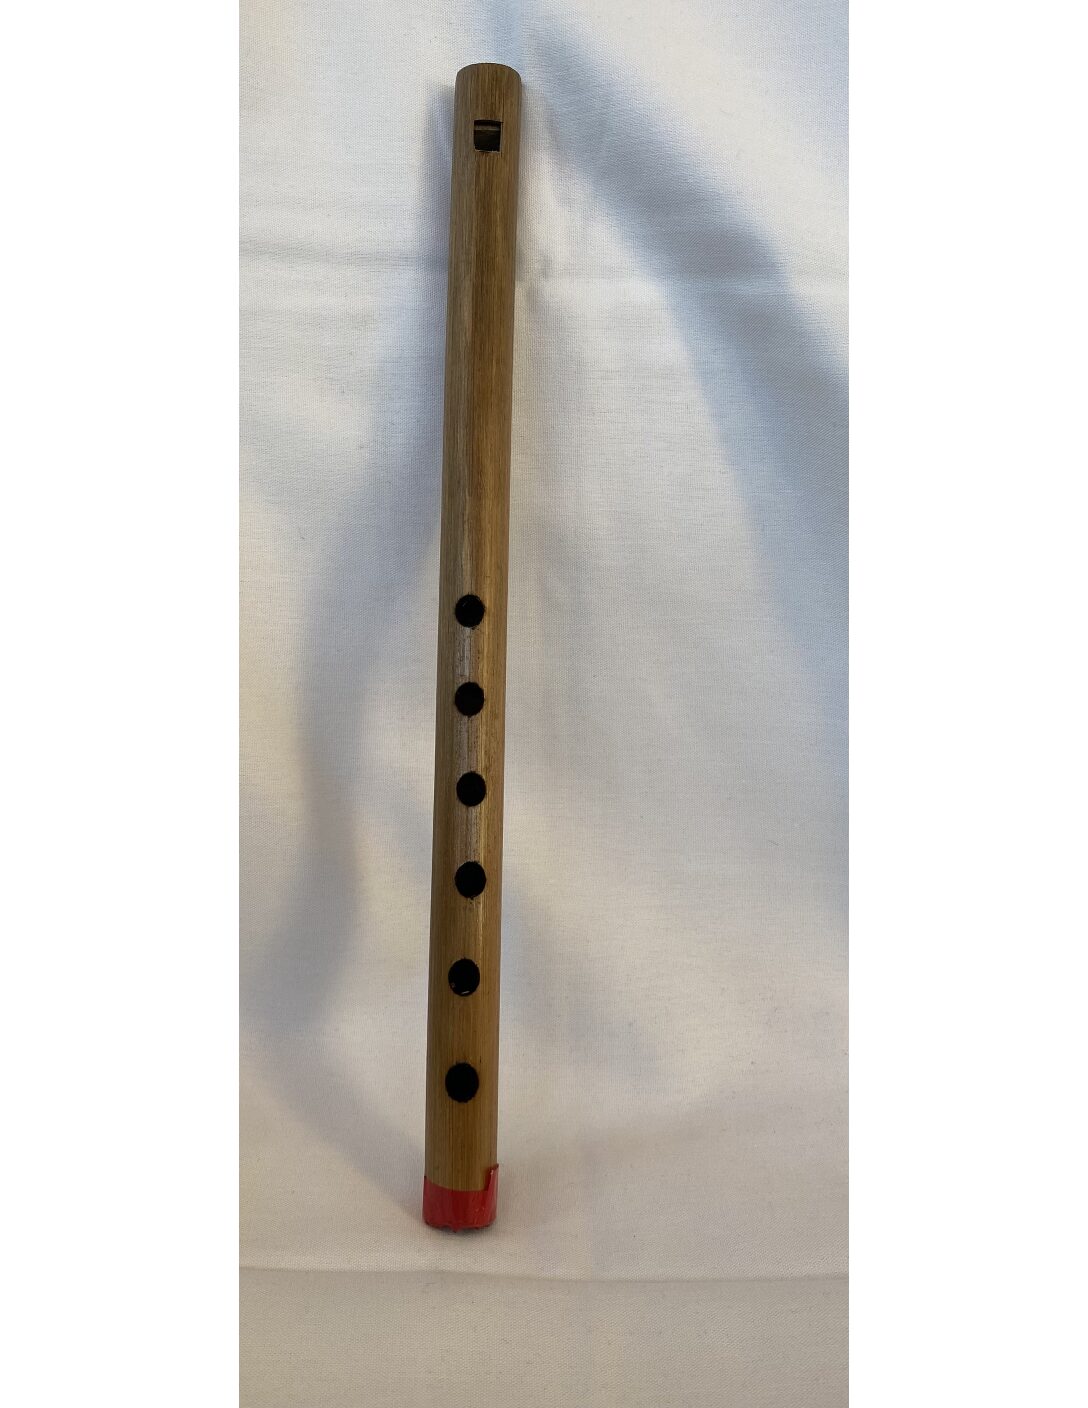 Reed Flute